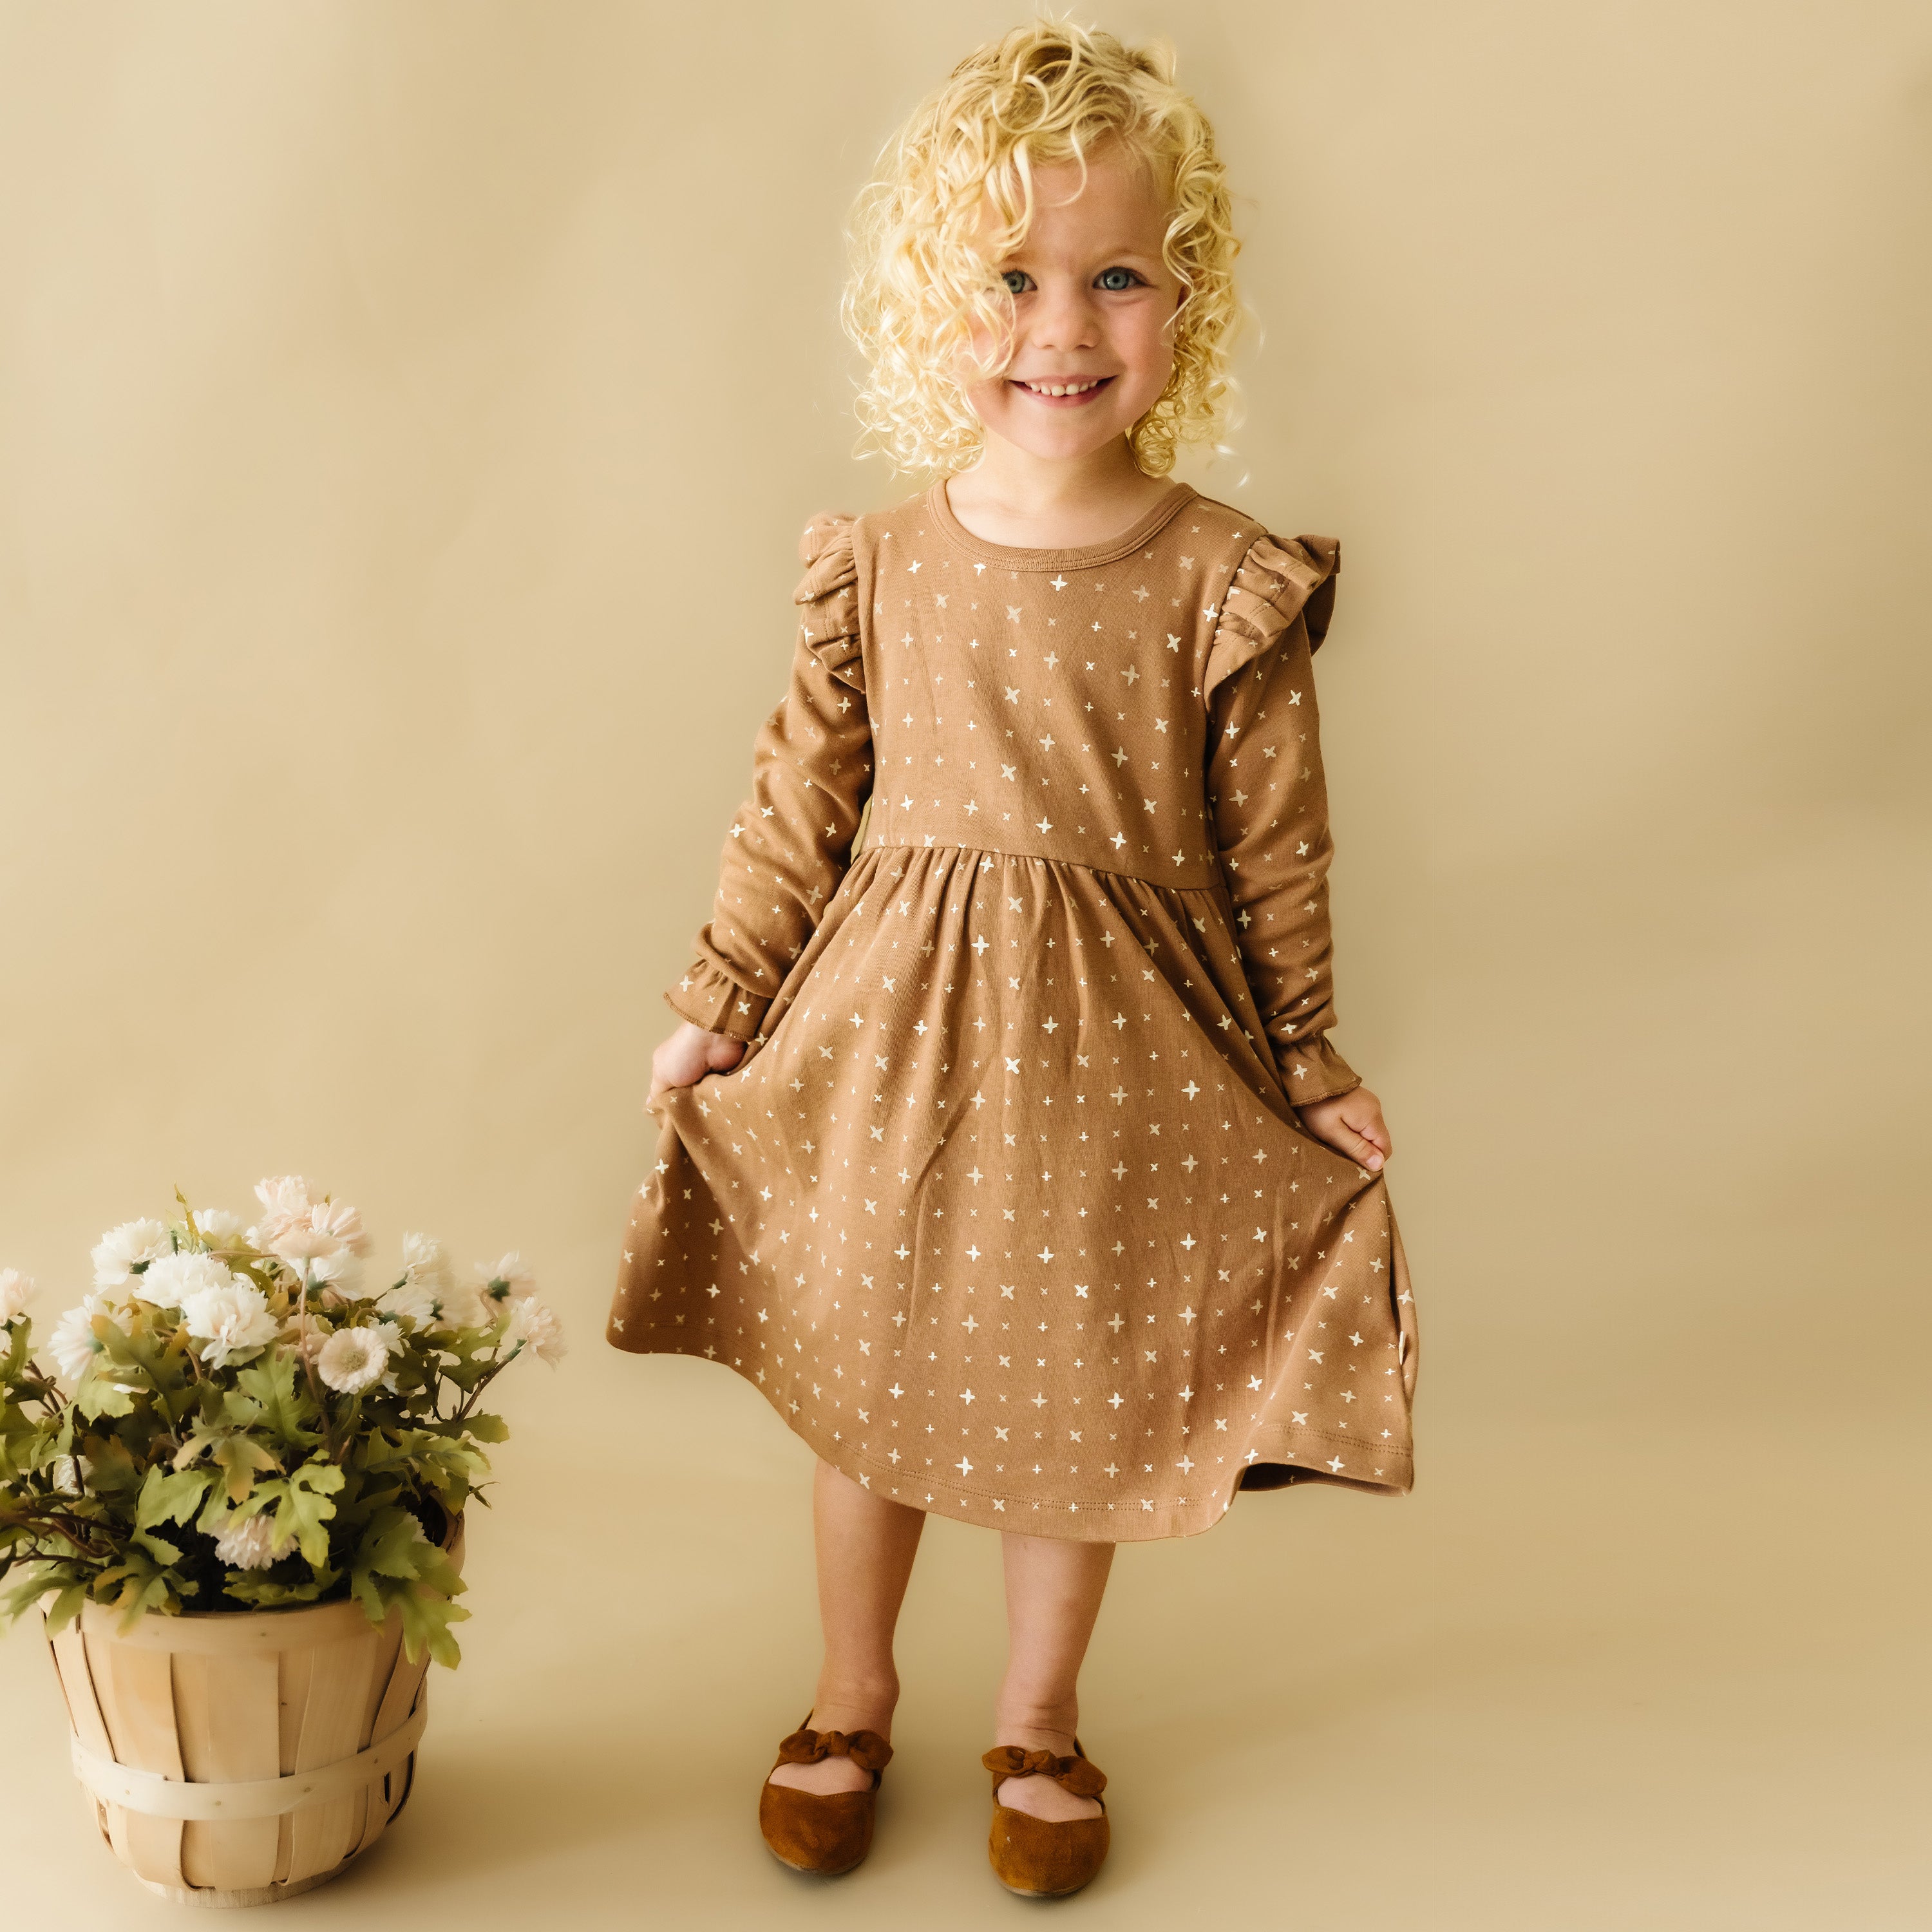 A young girl with curly blonde hair smiles while wearing an Organic Girls Sparkle Ruffle Dress and brown shoes, standing next to a basket of flowers against a tan backdrop.